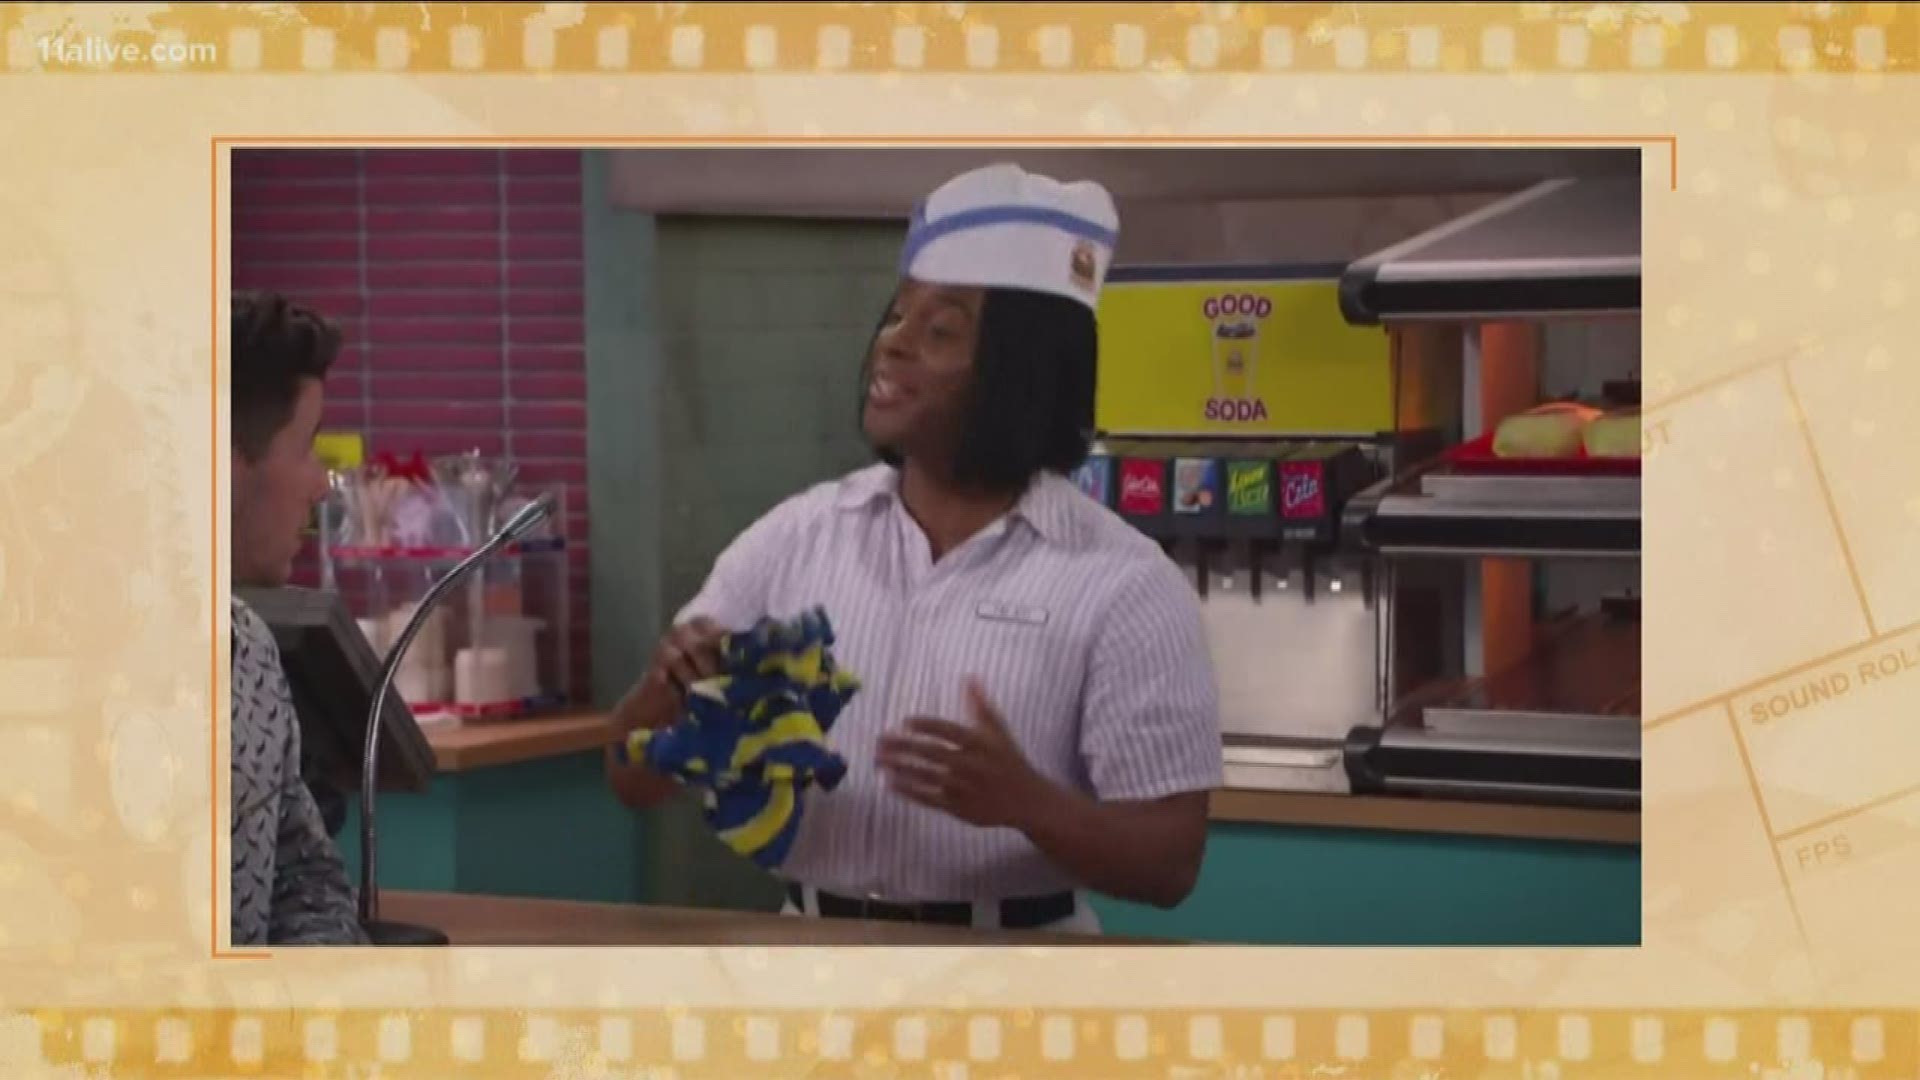 The beloved 90s sketch comedy show has been rebooted and returned to air over the weekend. Kel Mitchell, an executive producer who starred in the original, spoke to 11Alive about the experience.